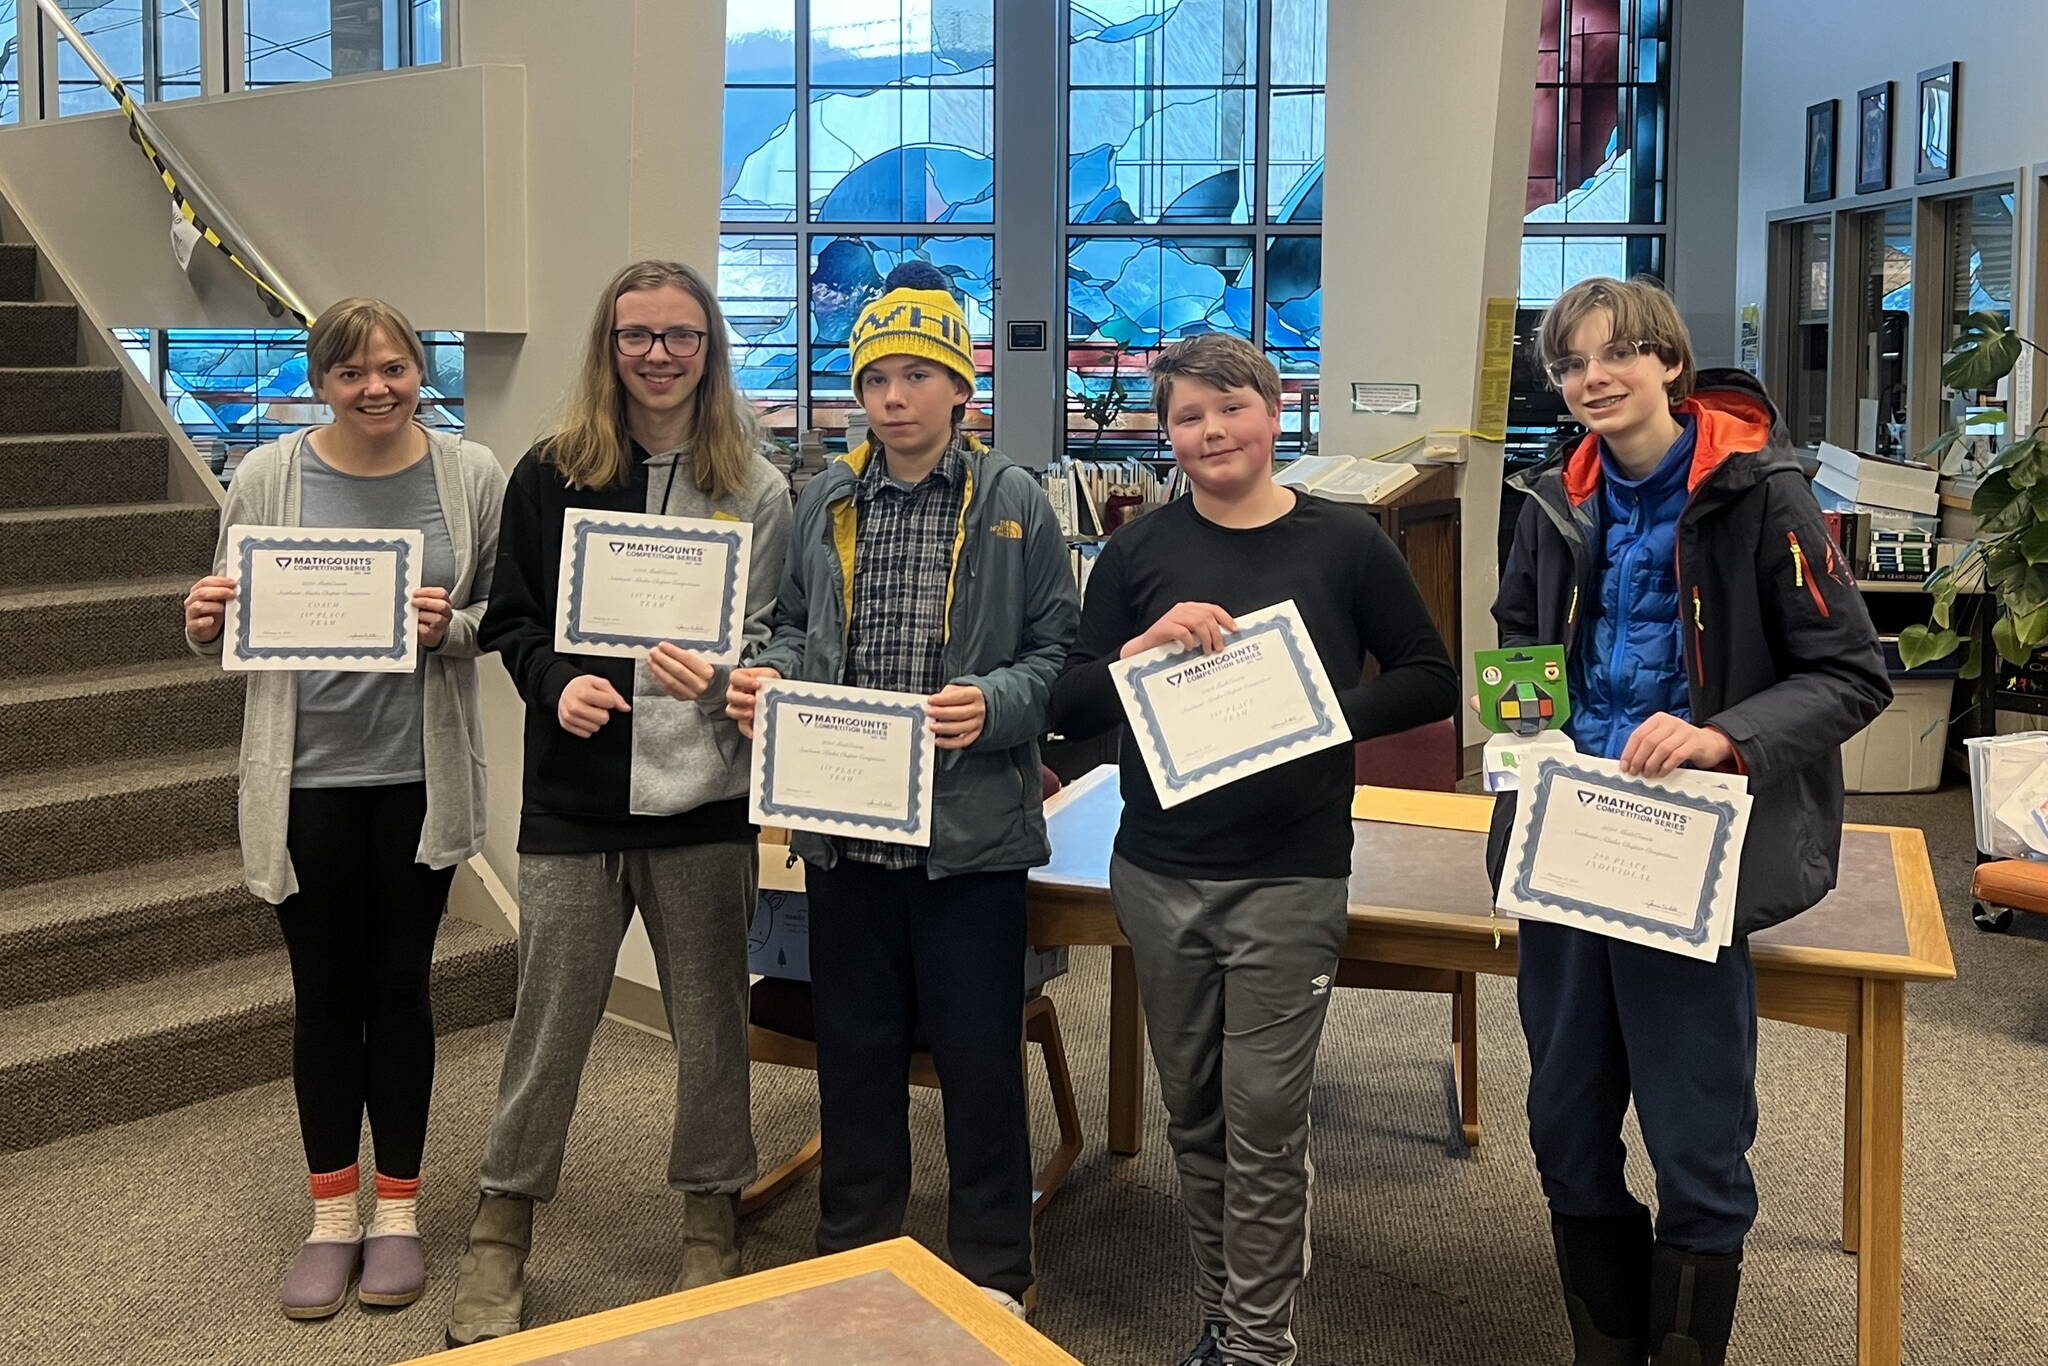 Bridget Braley, Anderson Murray, Matthew Schwarting, Oscar Lamb and Evan Converse participated in the Southeast Regional MATHCOUNTS Competition on Feb. 10. (Photo courtesy of MATHCOUNTS)